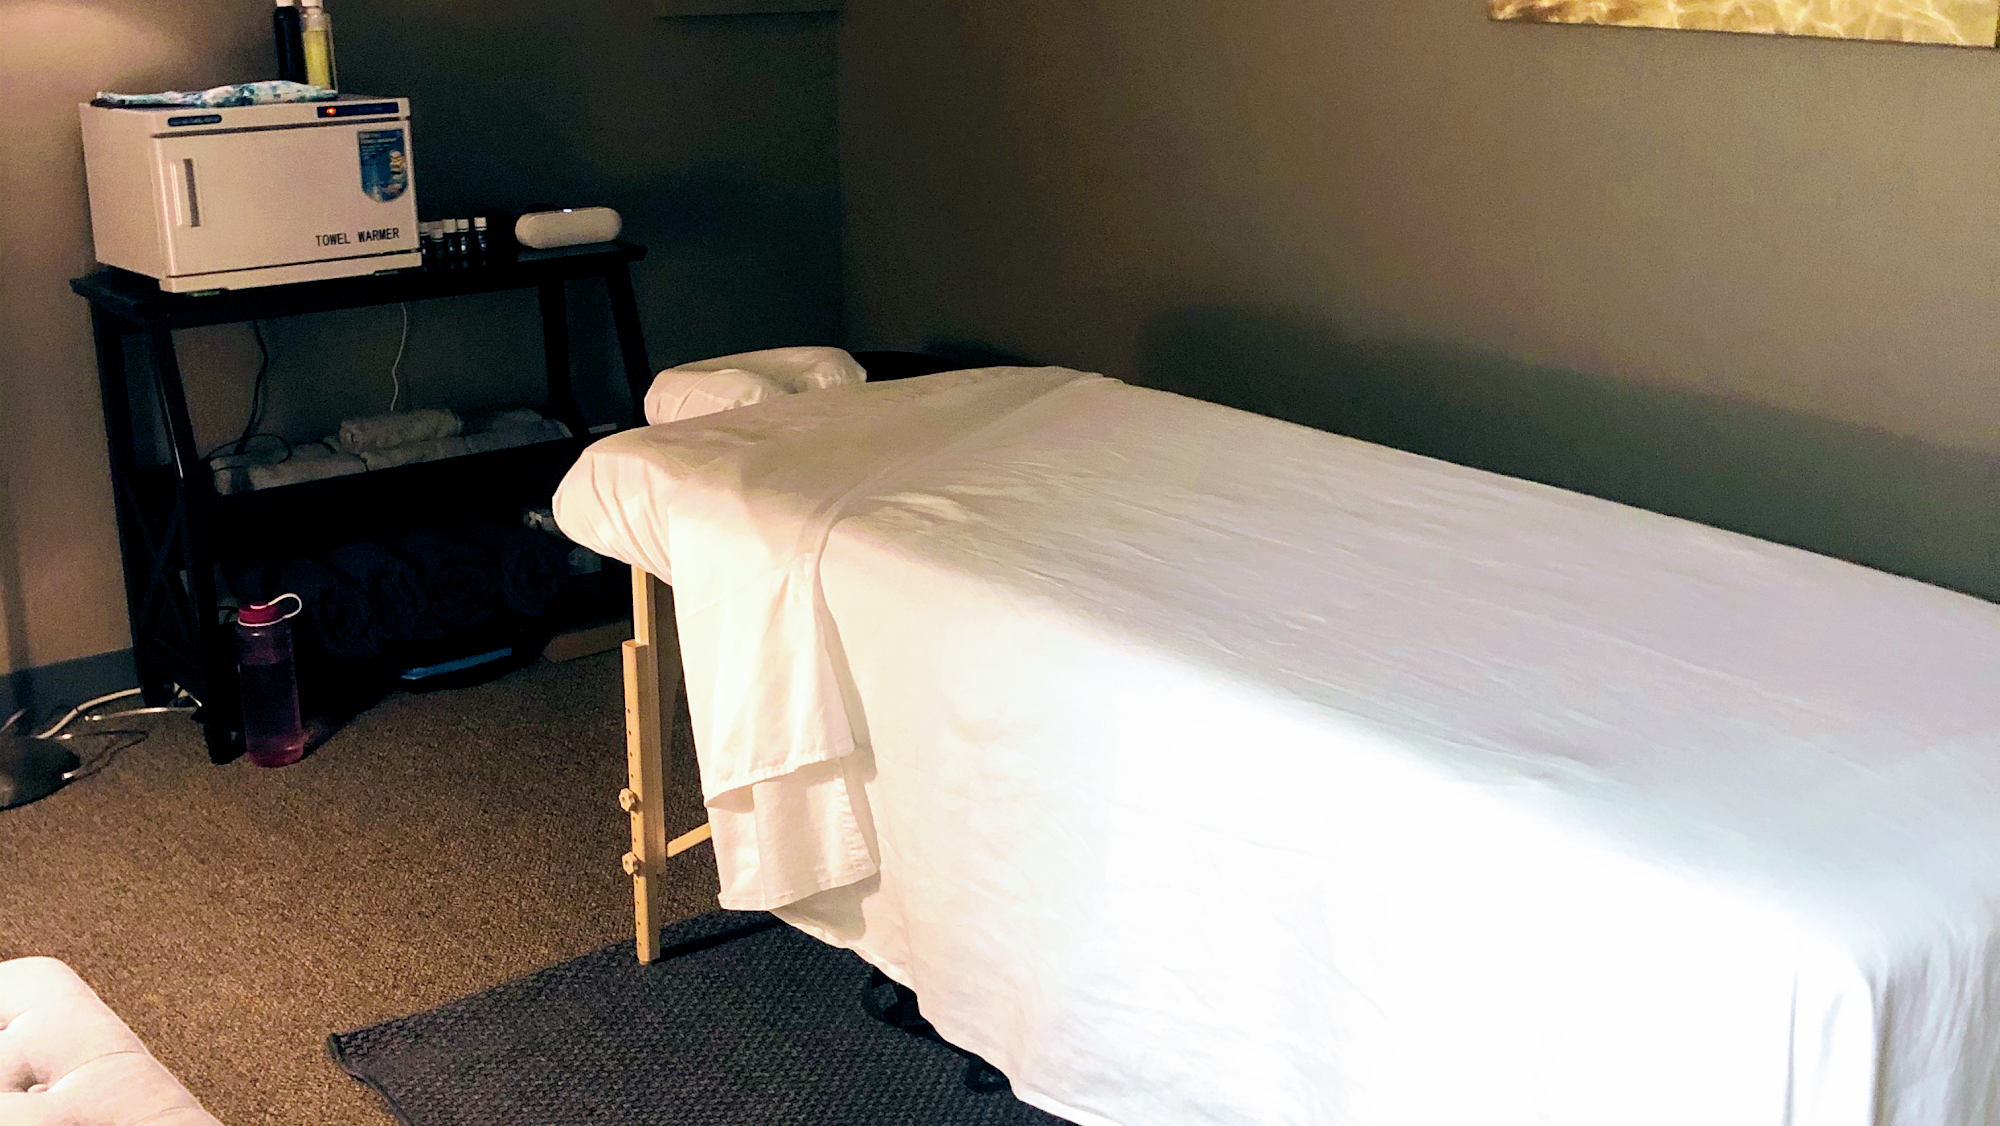 Root & Bloom Massage Therapy 276 Kingsbury Grade Rd #1050, Stateline Nevada 89449